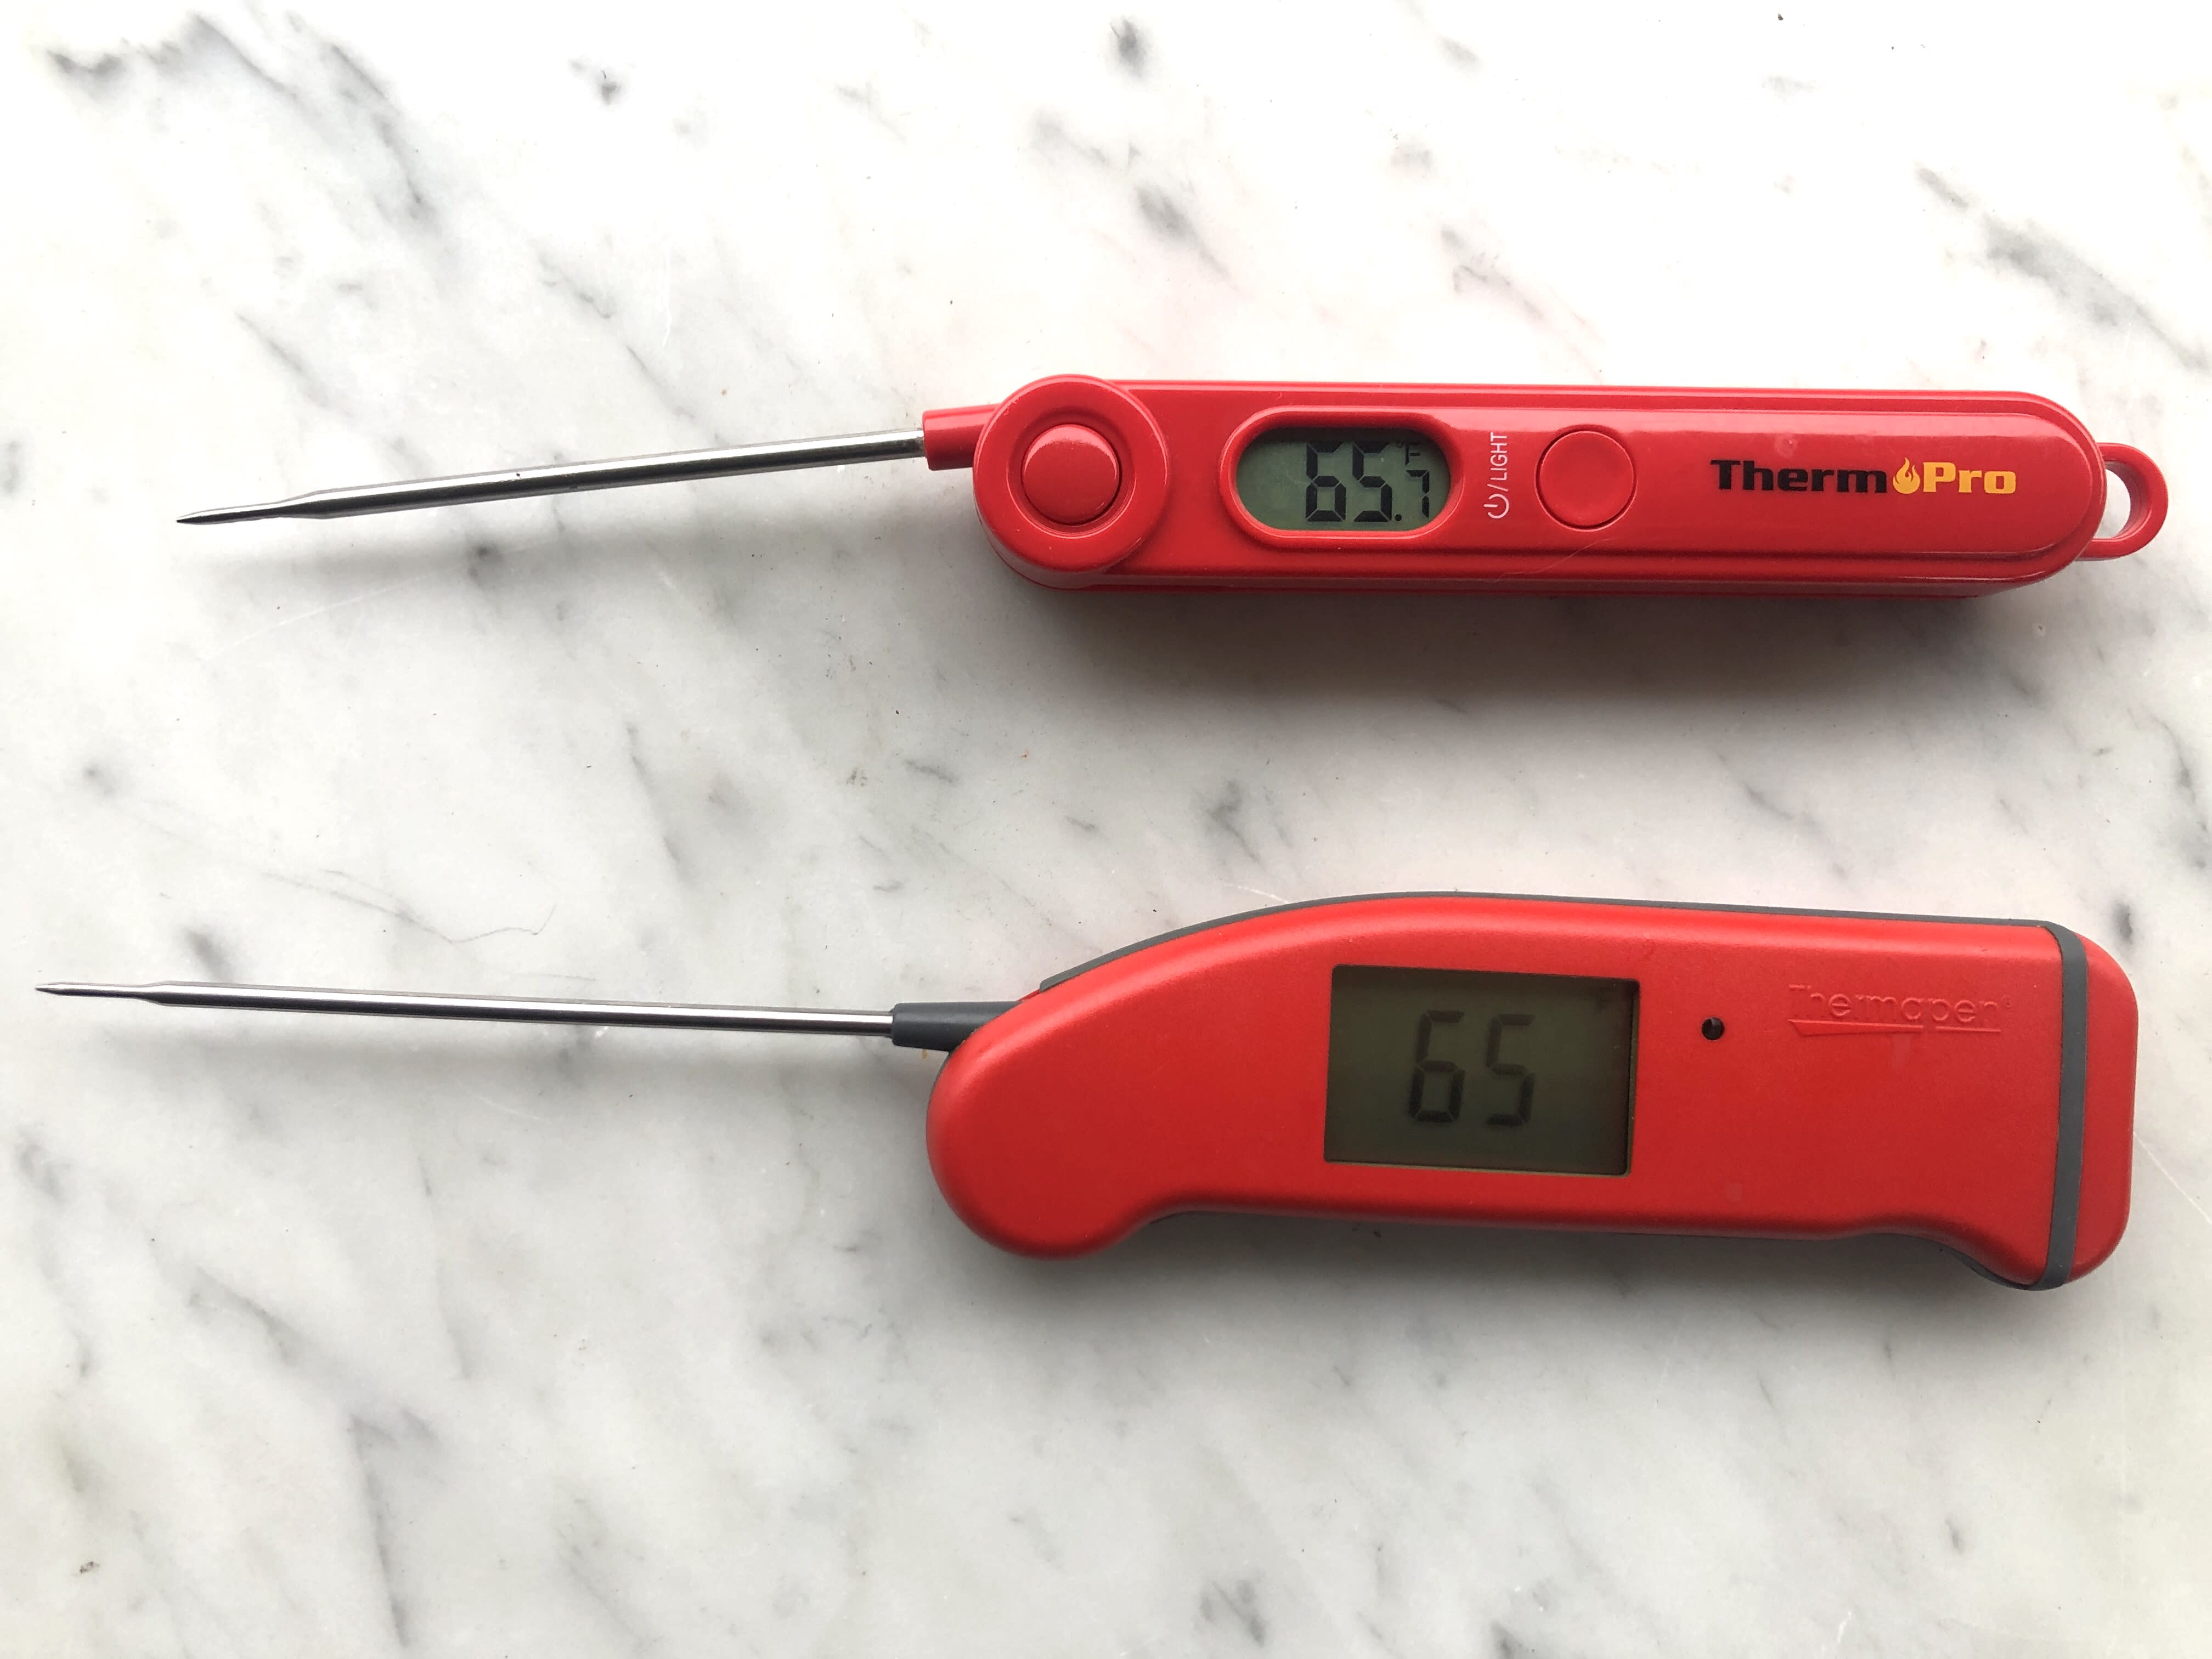 https://cdn.apartmenttherapy.info/image/upload/v1580169697/k/Edit/2020-02-Meat-Thermometer/Thermometer3.jpg